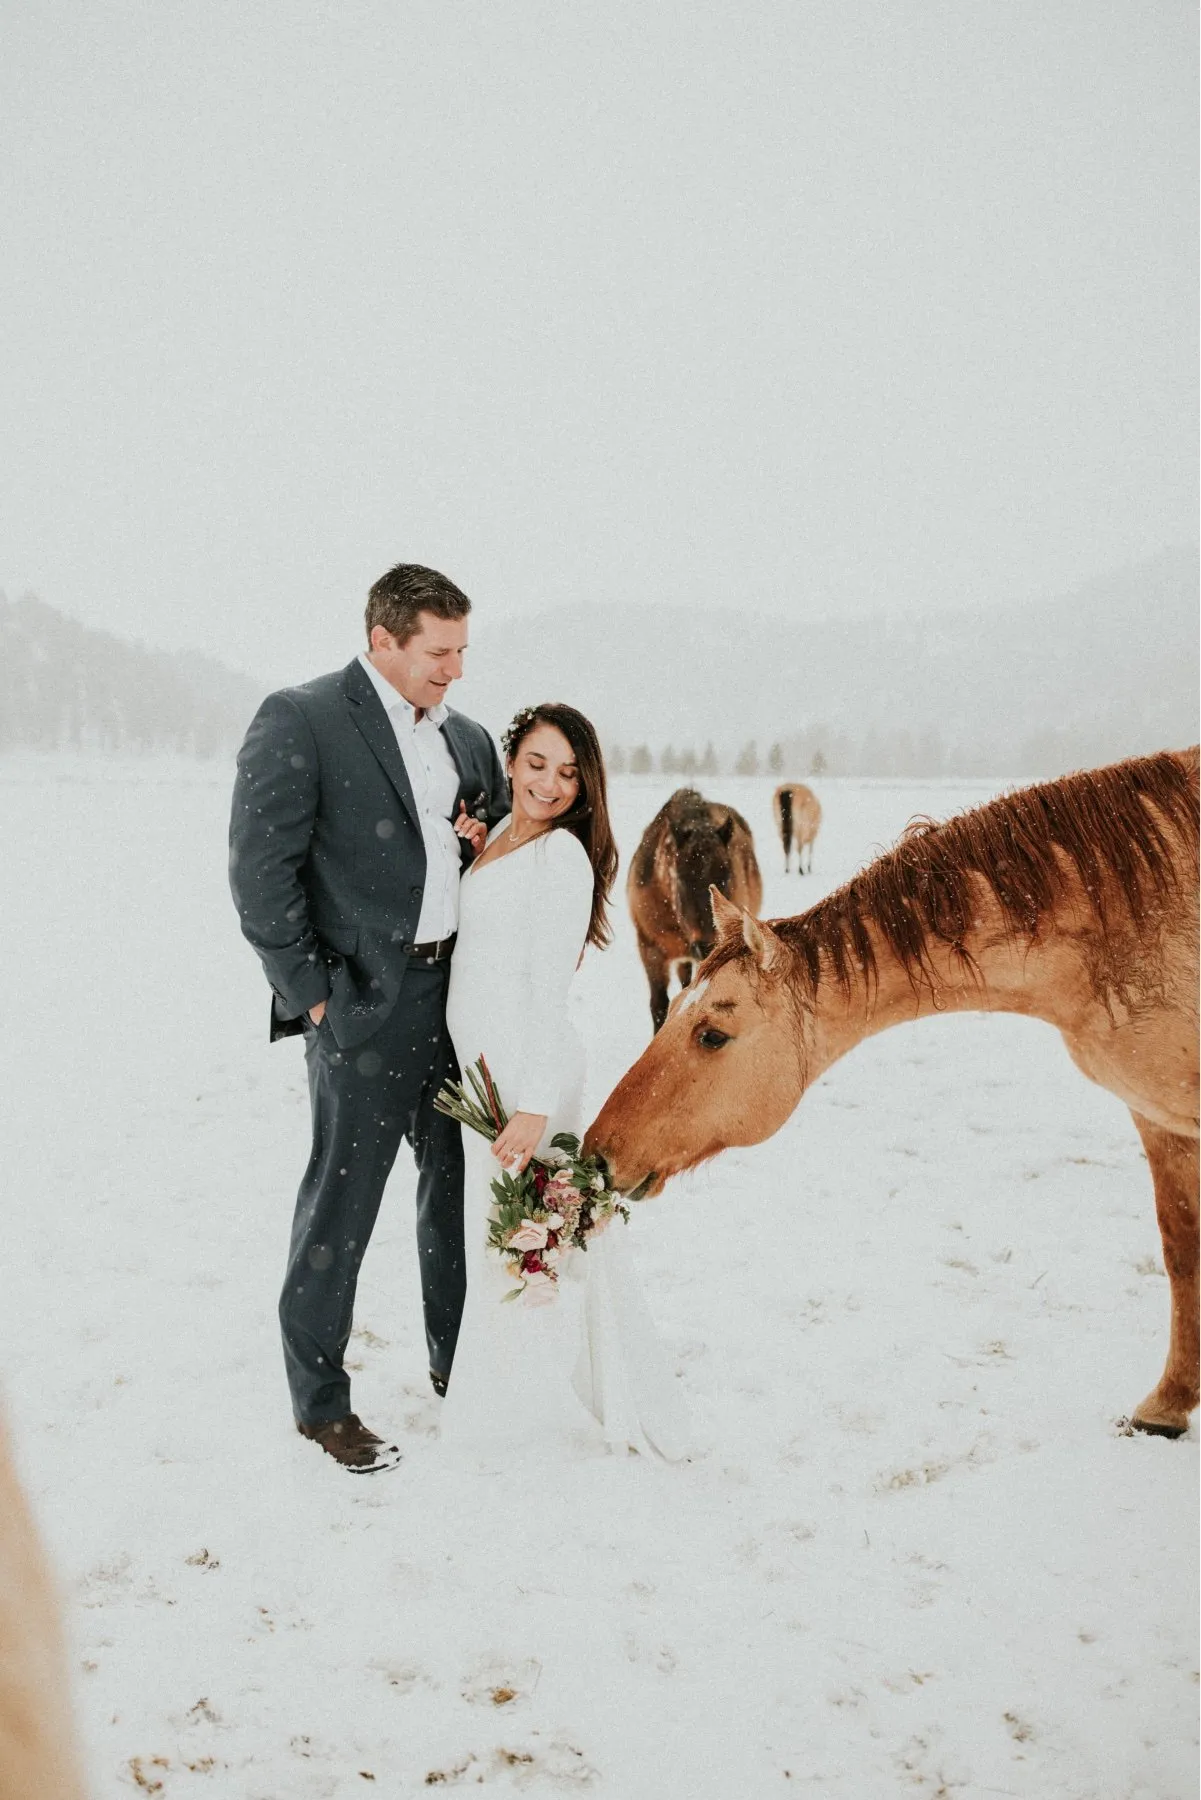 Bride and groom in snowy field with horse trying to eat the bouquet